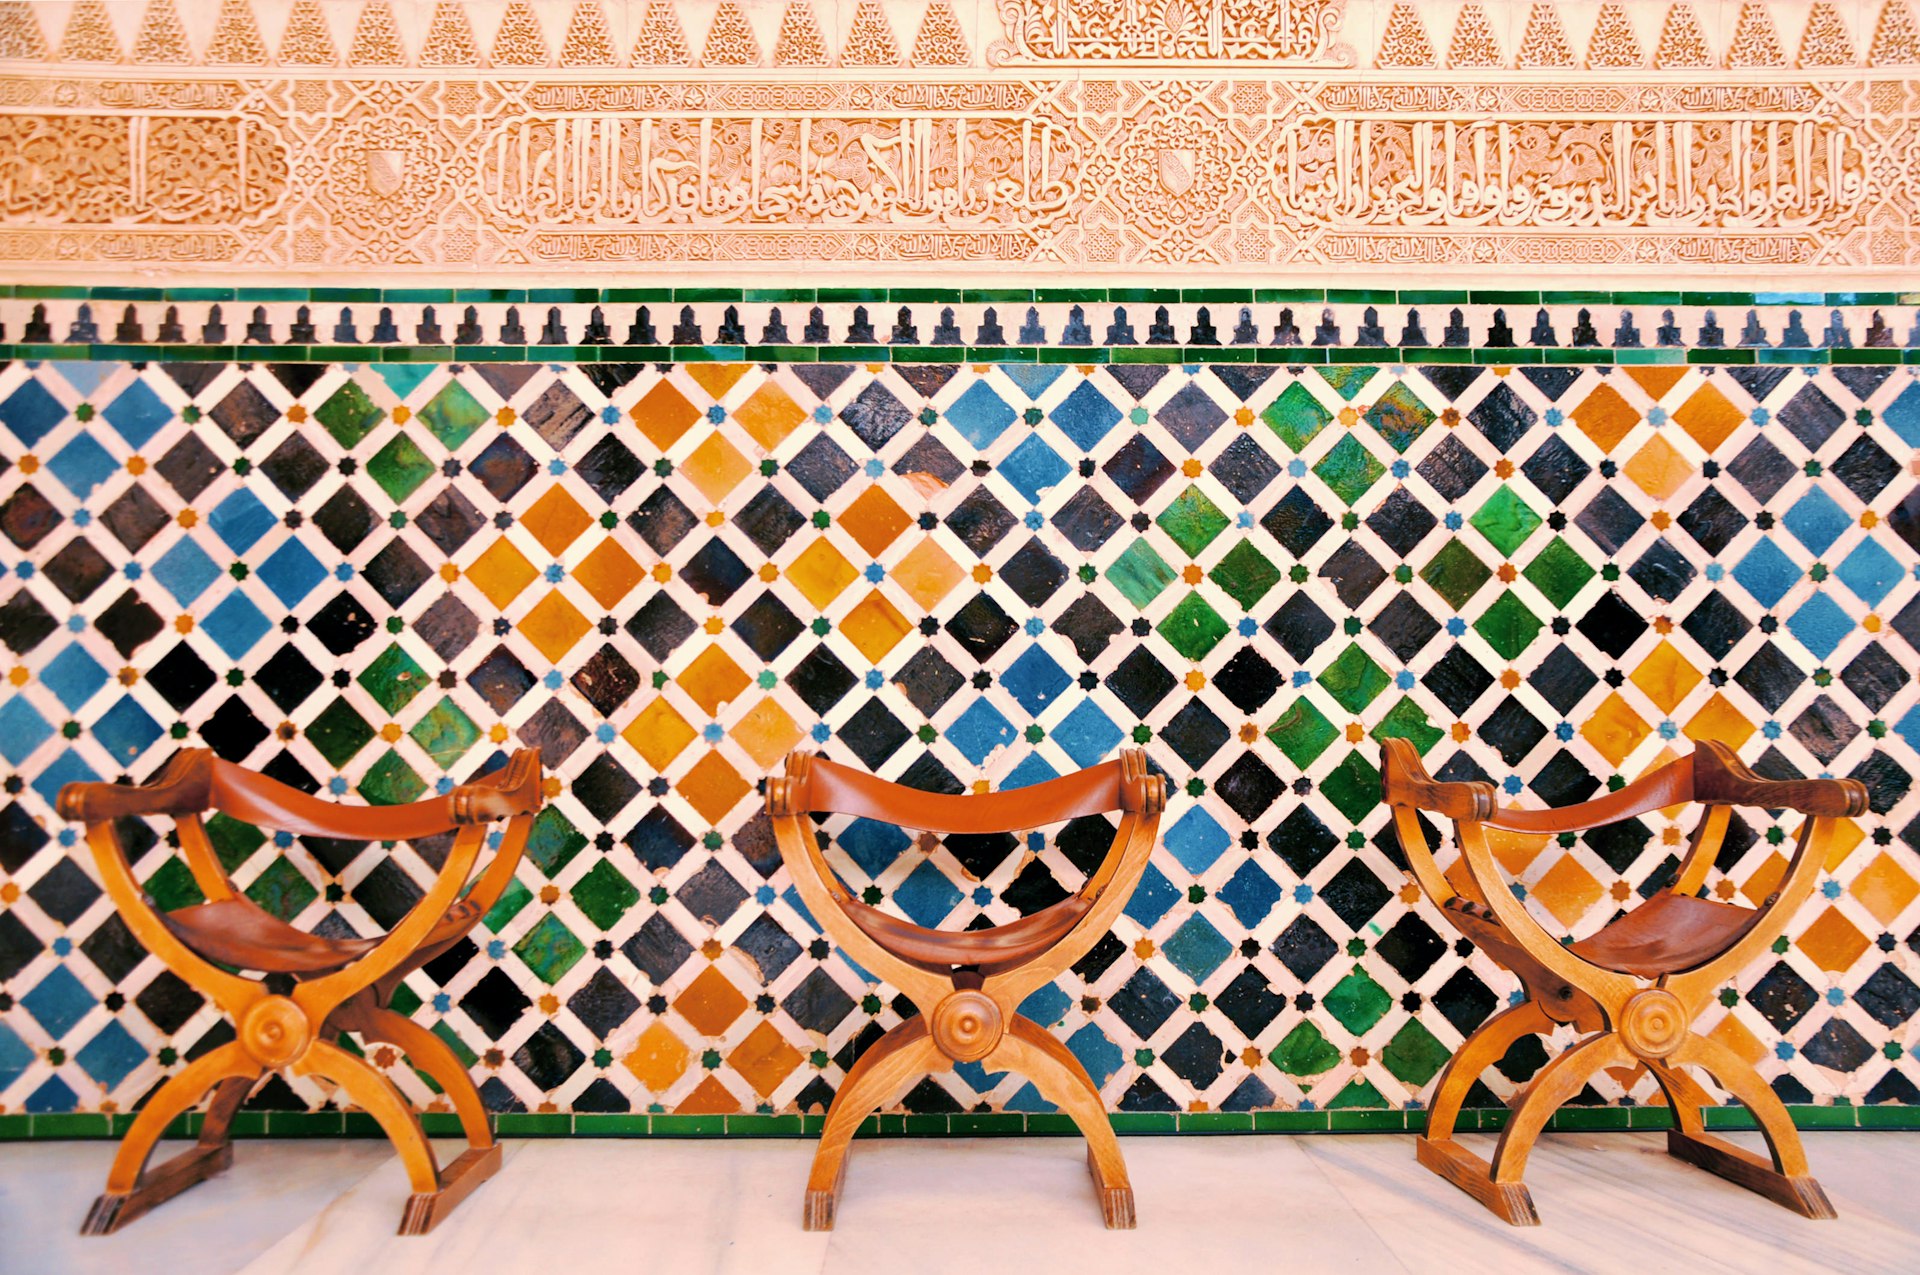 Colourful tiled wall in the courtyard of the palace of Alhambra, Granada